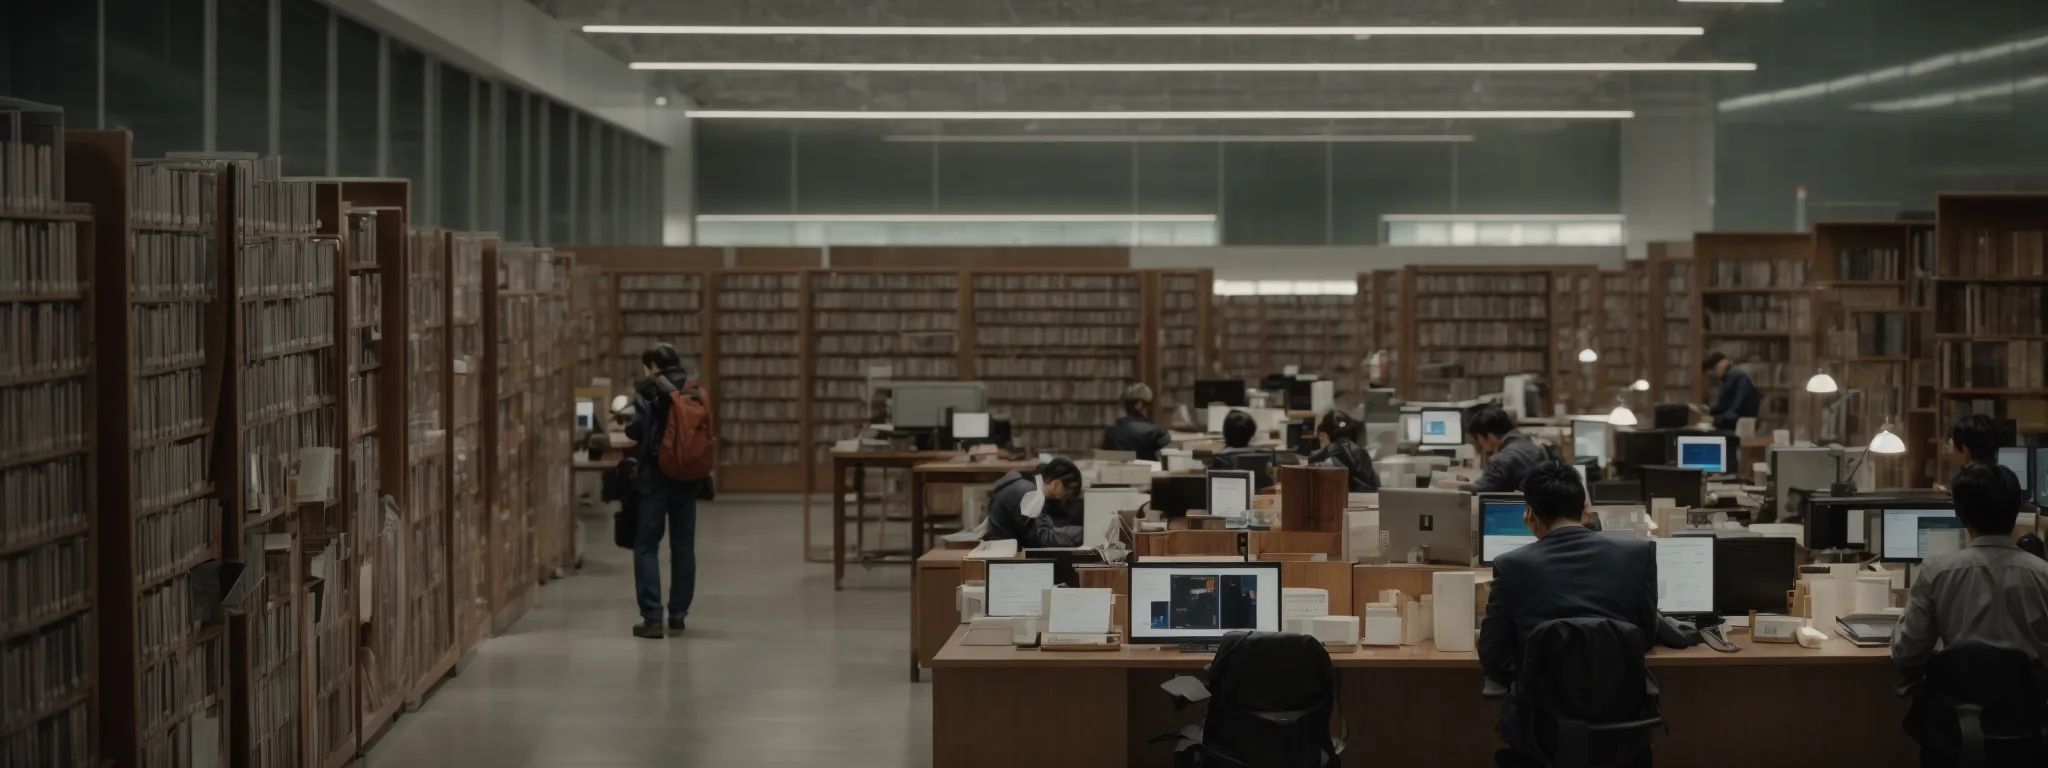 a bustling digital library with users browsing through organized archives on computer screens.